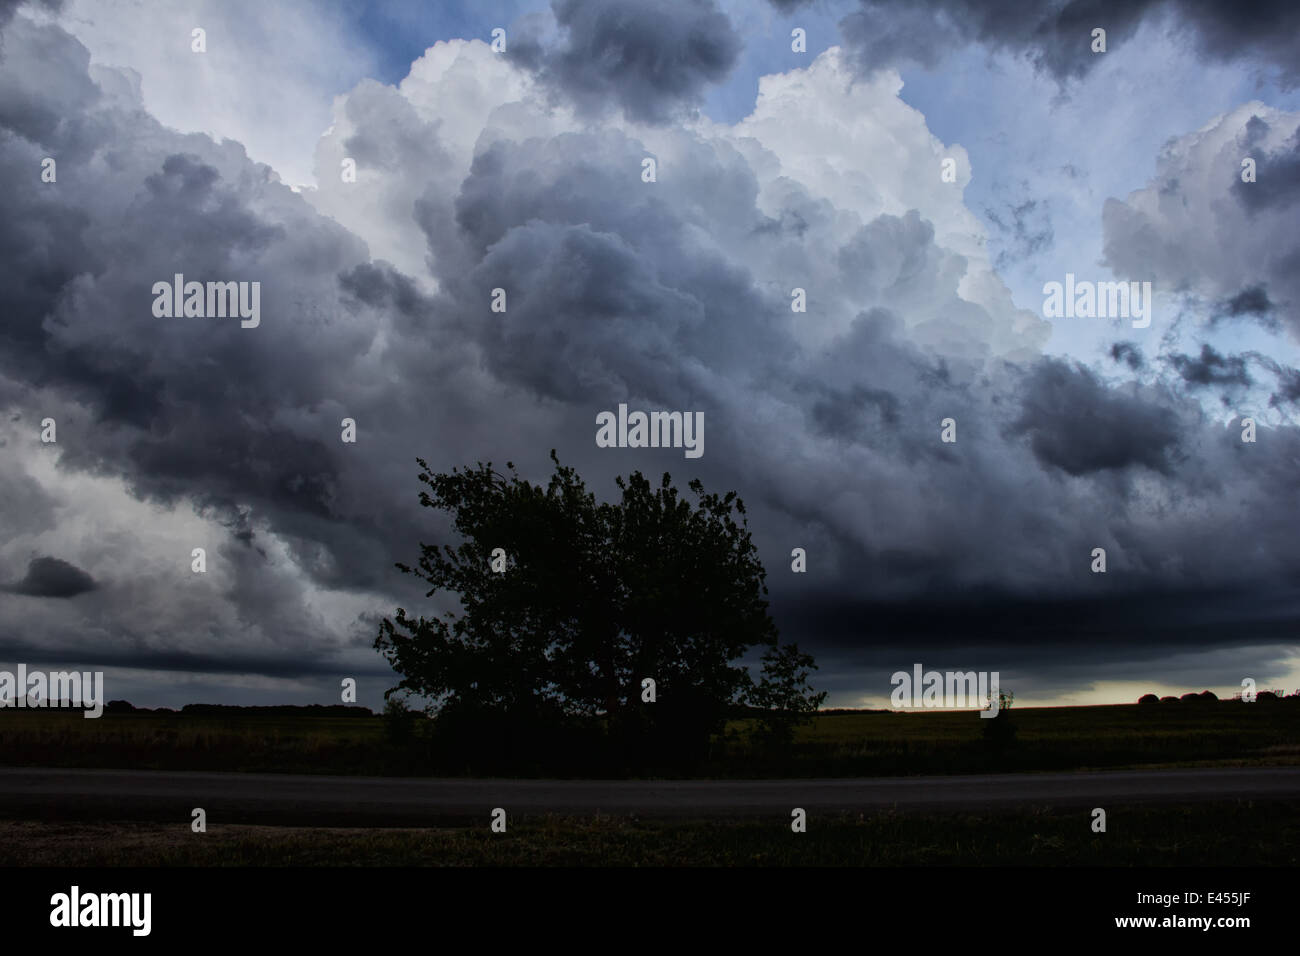 As night falls, a multicellular band of storms blows over the landscape, Pratt, Kansas, USA Stock Photo